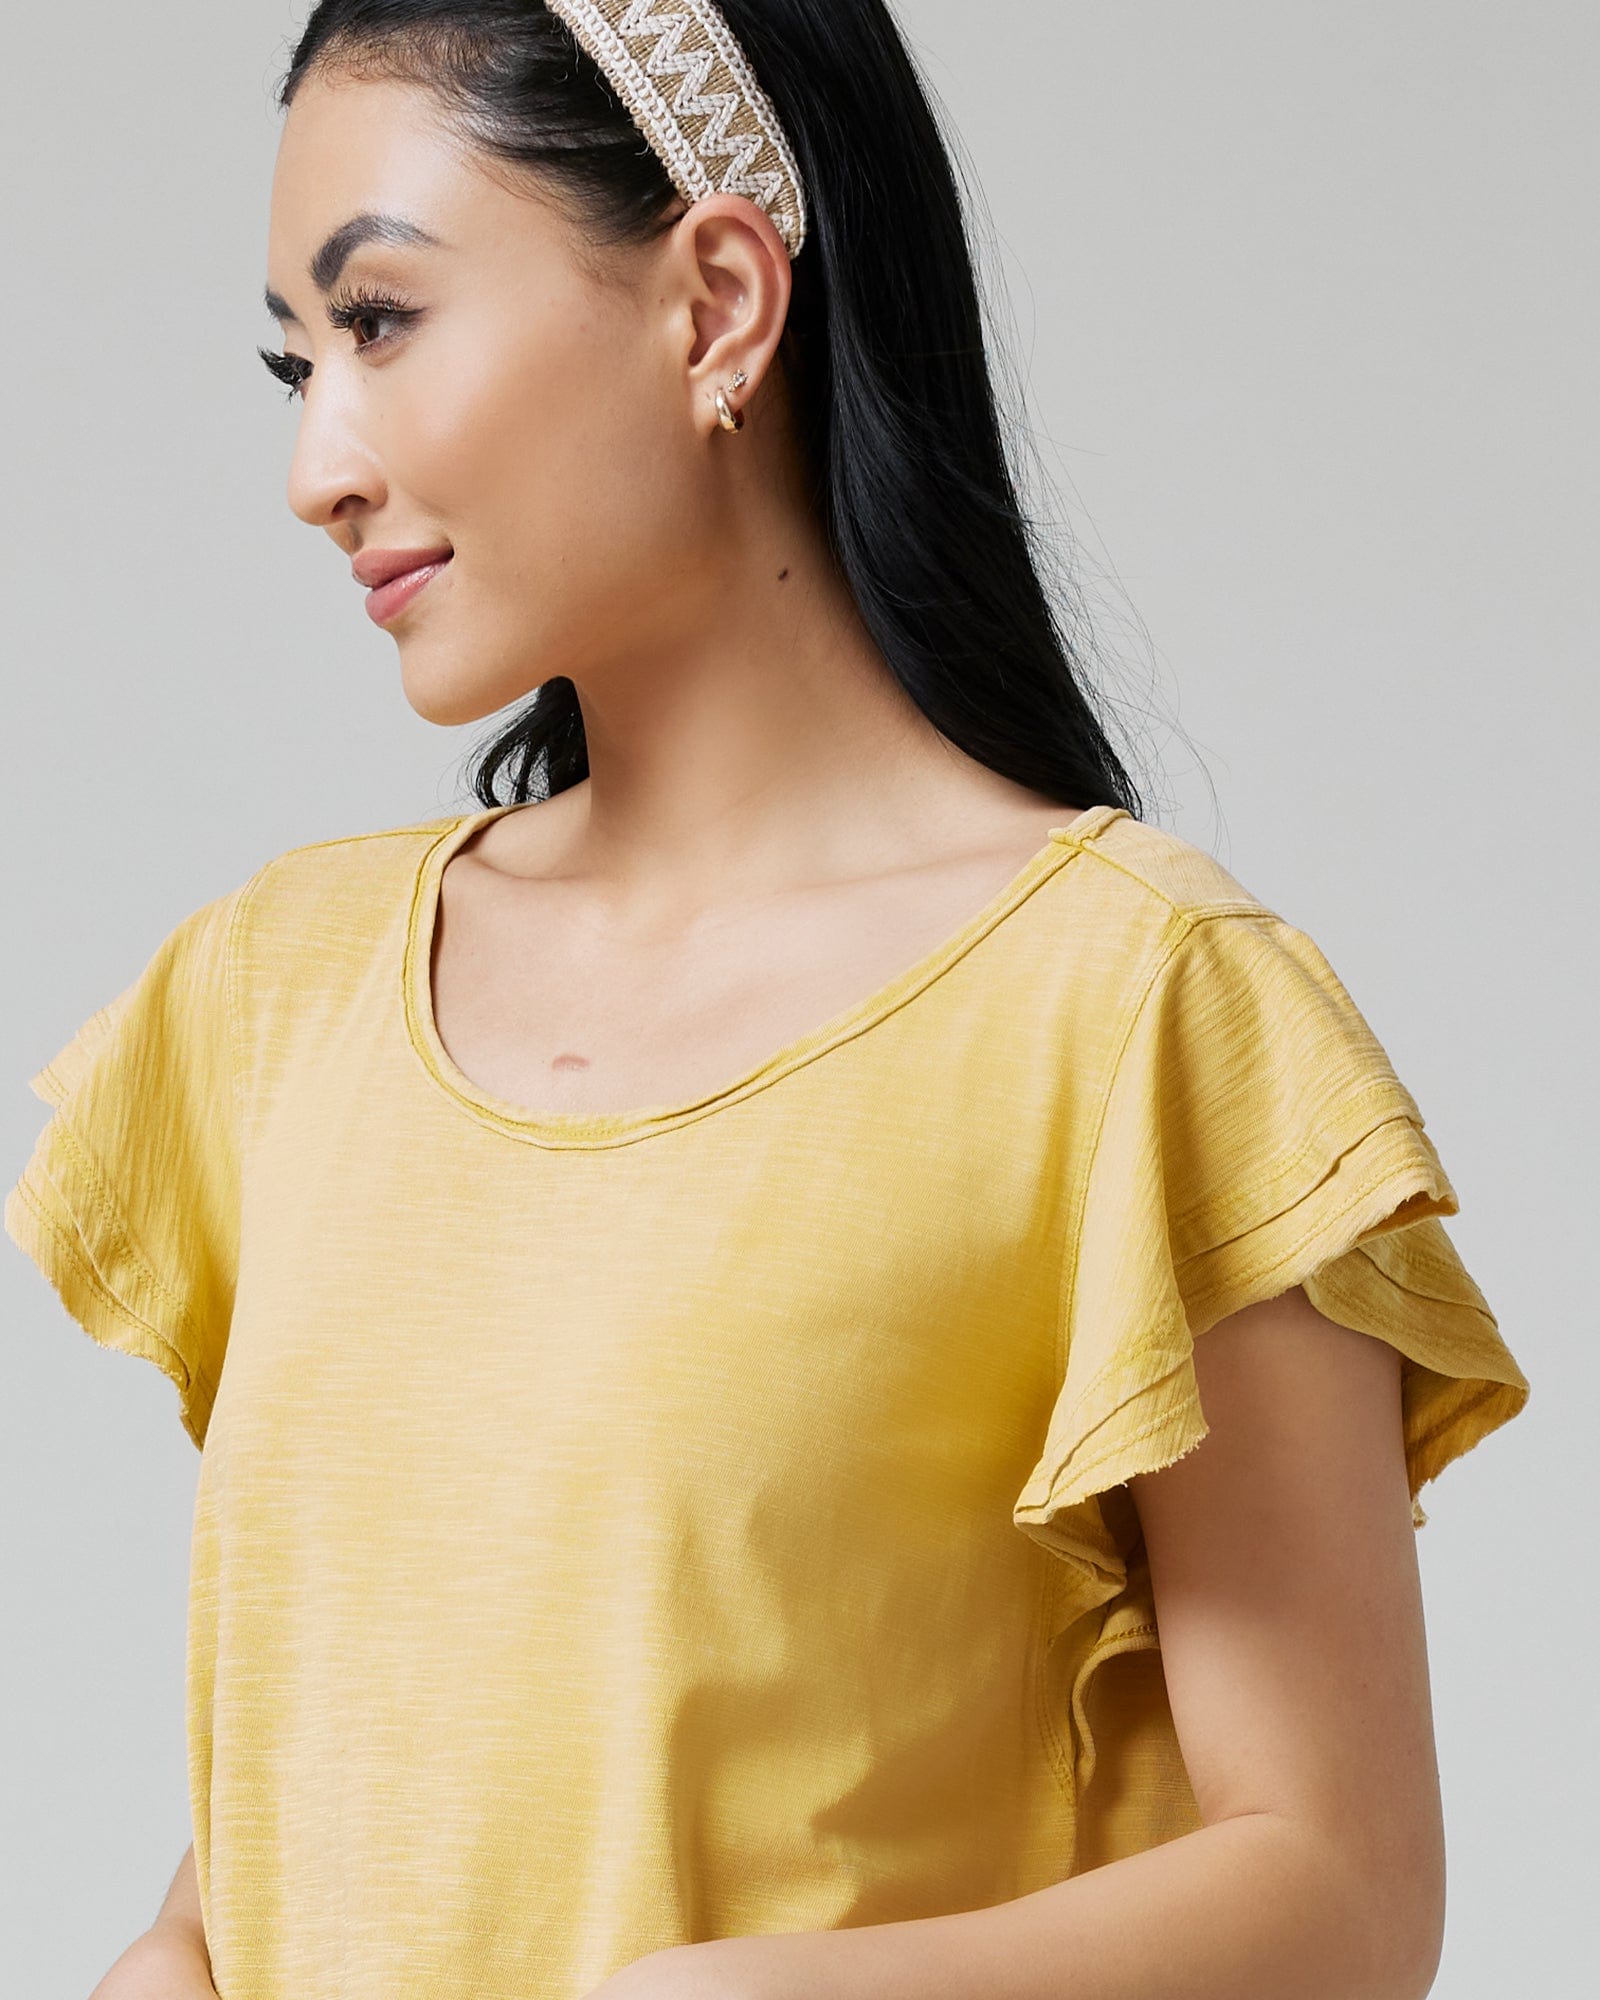 Woman in a top with short, flutter sleeves